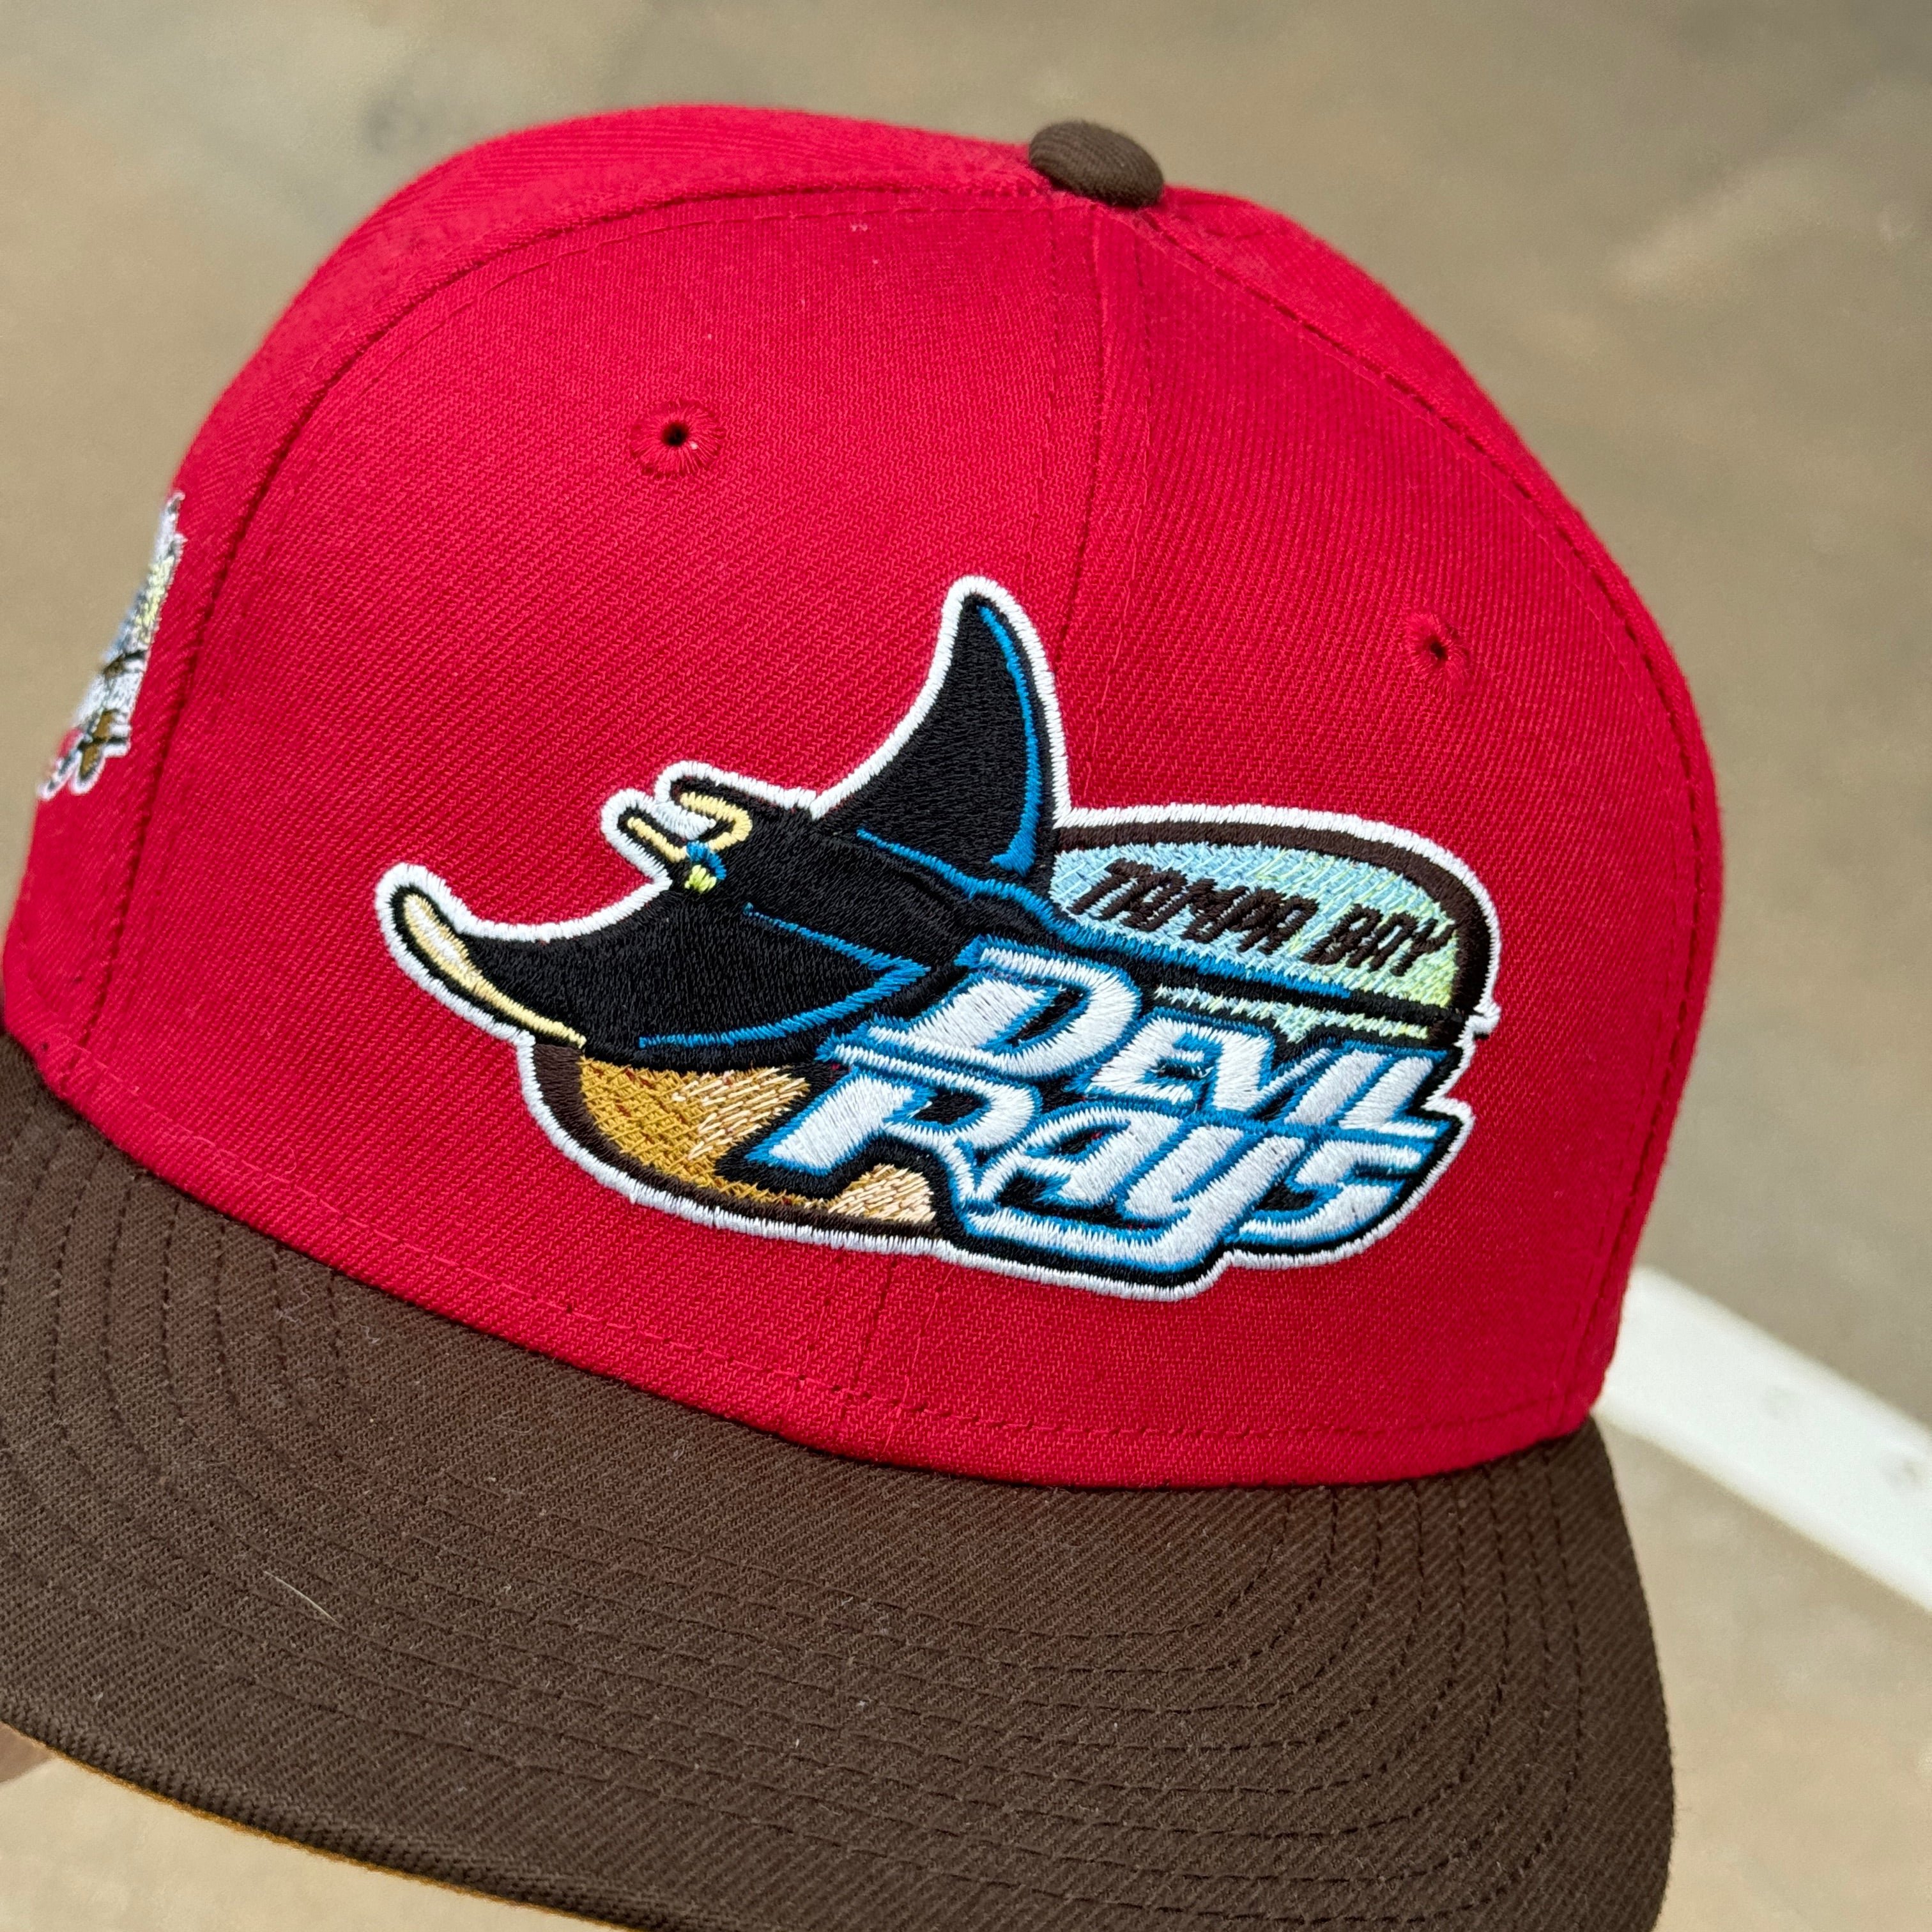 USED 1/8 Brick Red Tampa Devil Rays Inaugural Season 1998 59fifty New Era Fitted Hat Cap